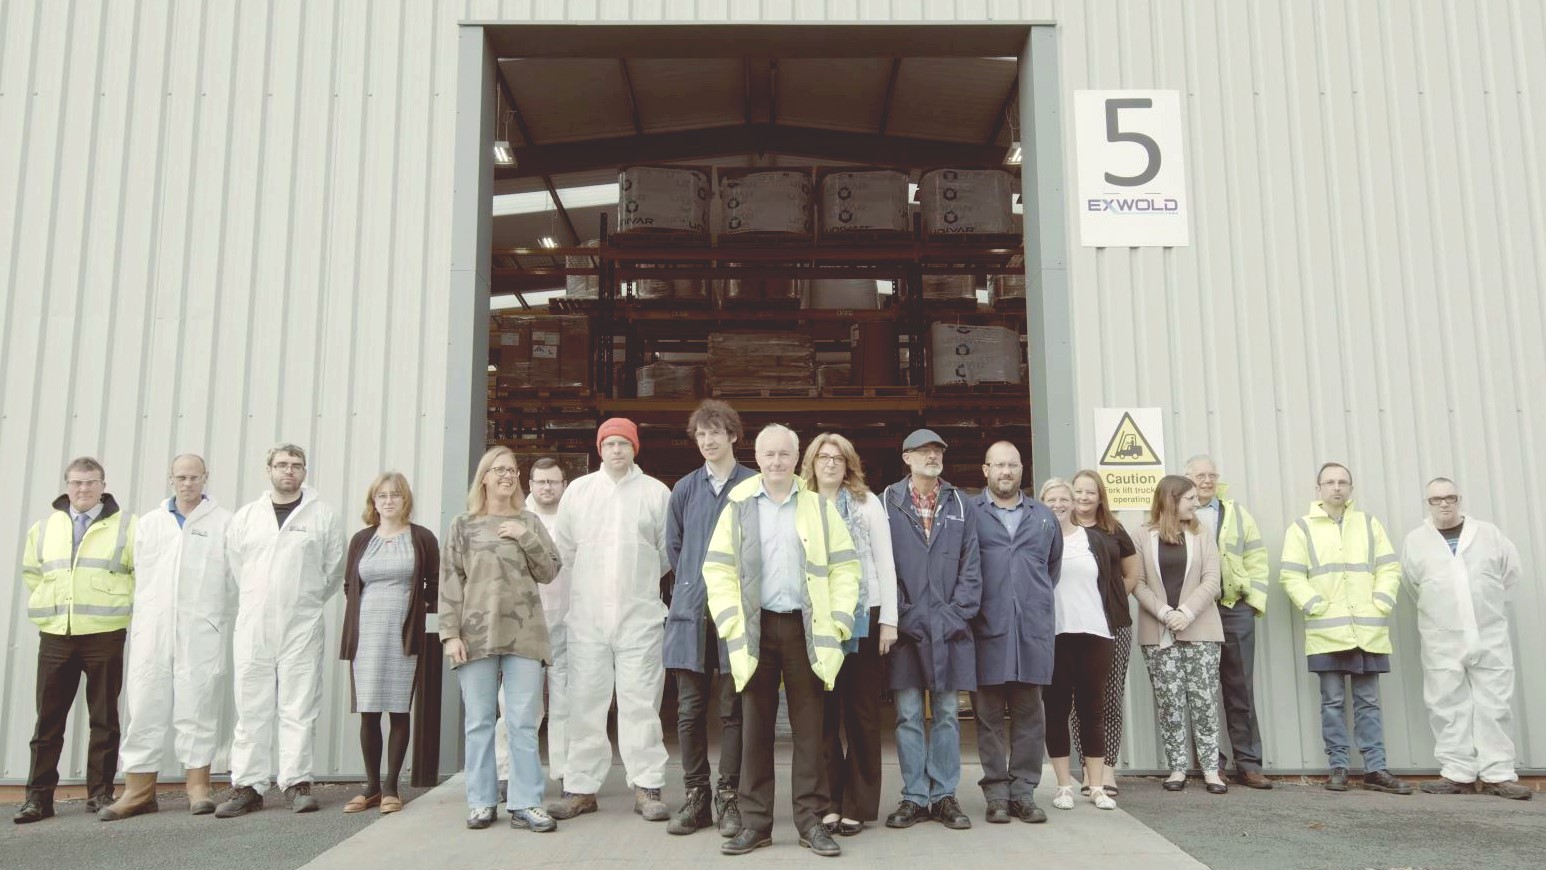 The team at Exwold Technology who received an investment from UKSE